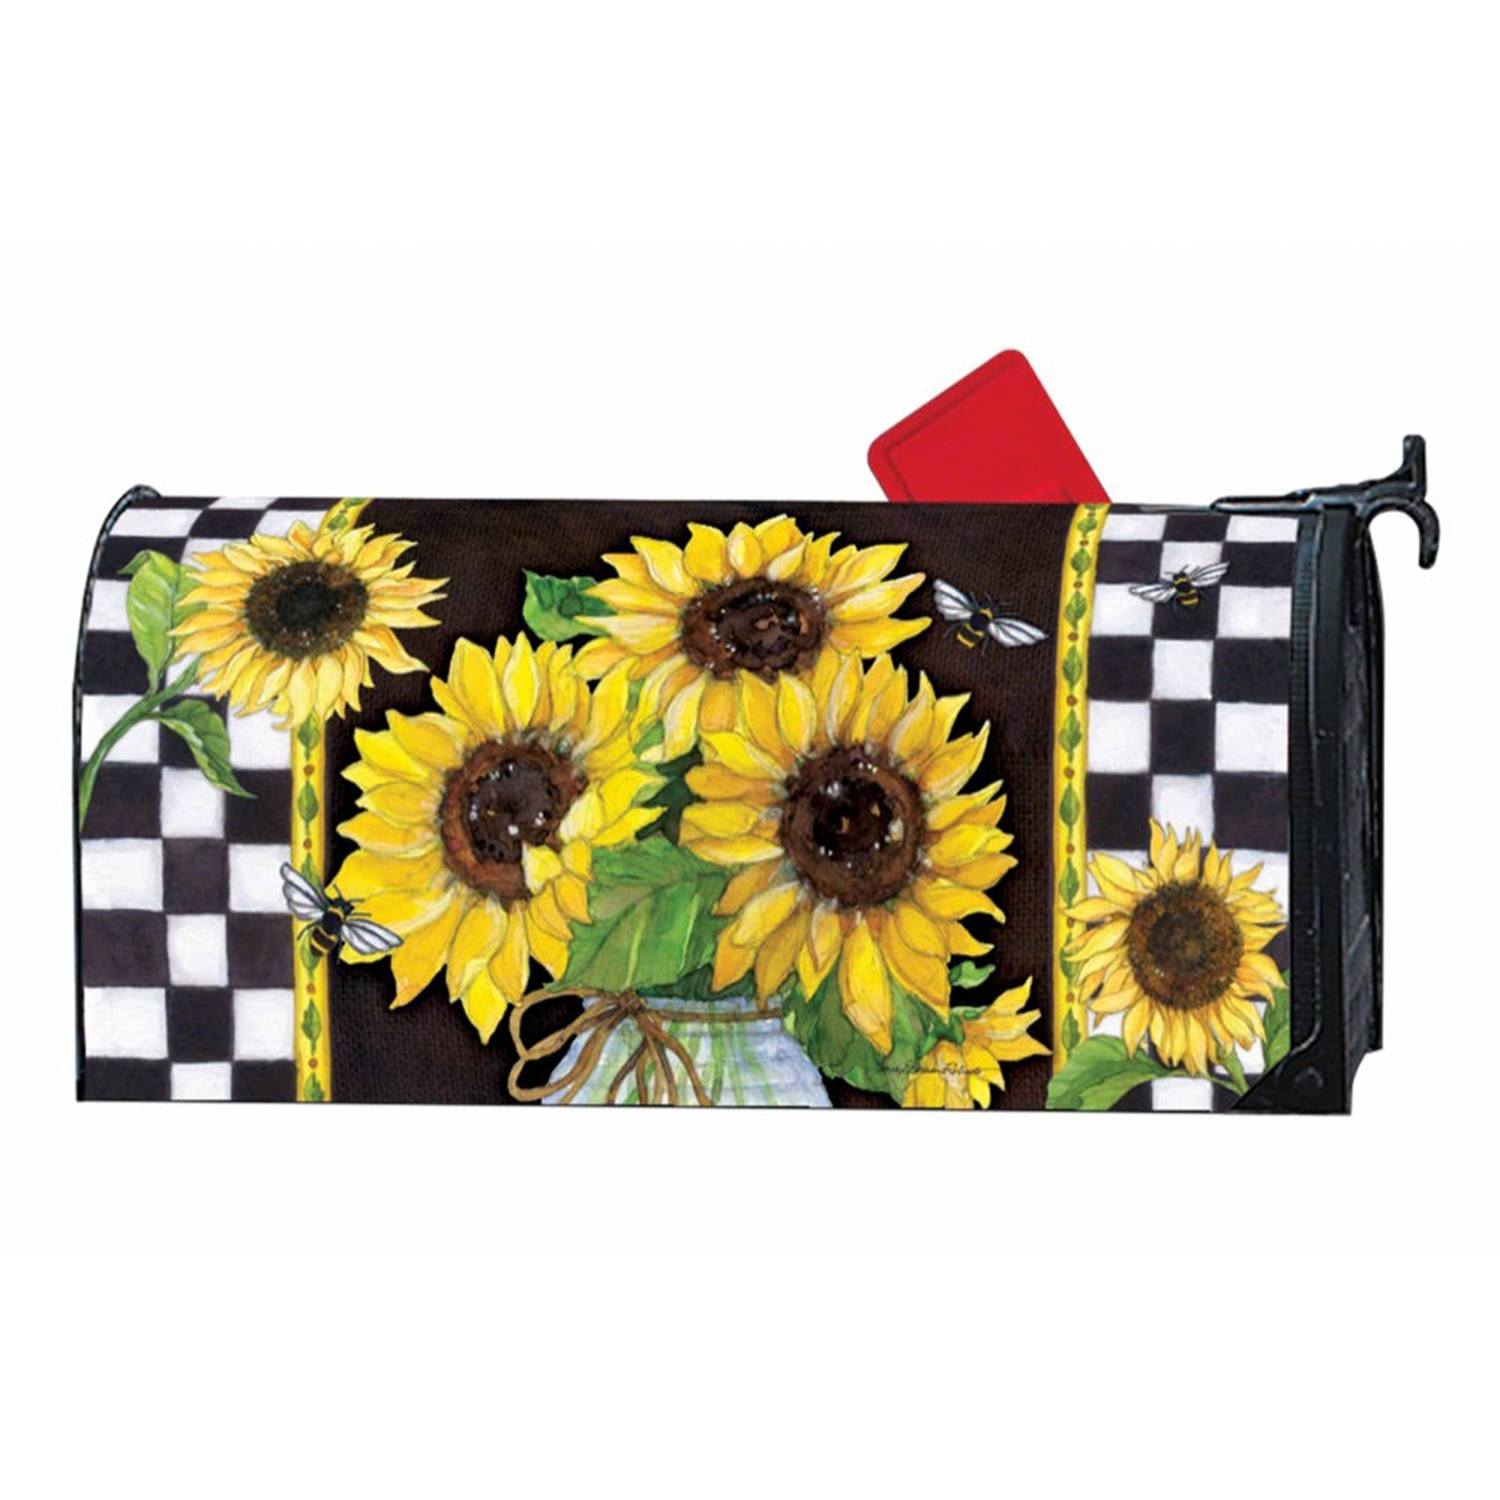 Magnet Works Sunflowers Mailwrap